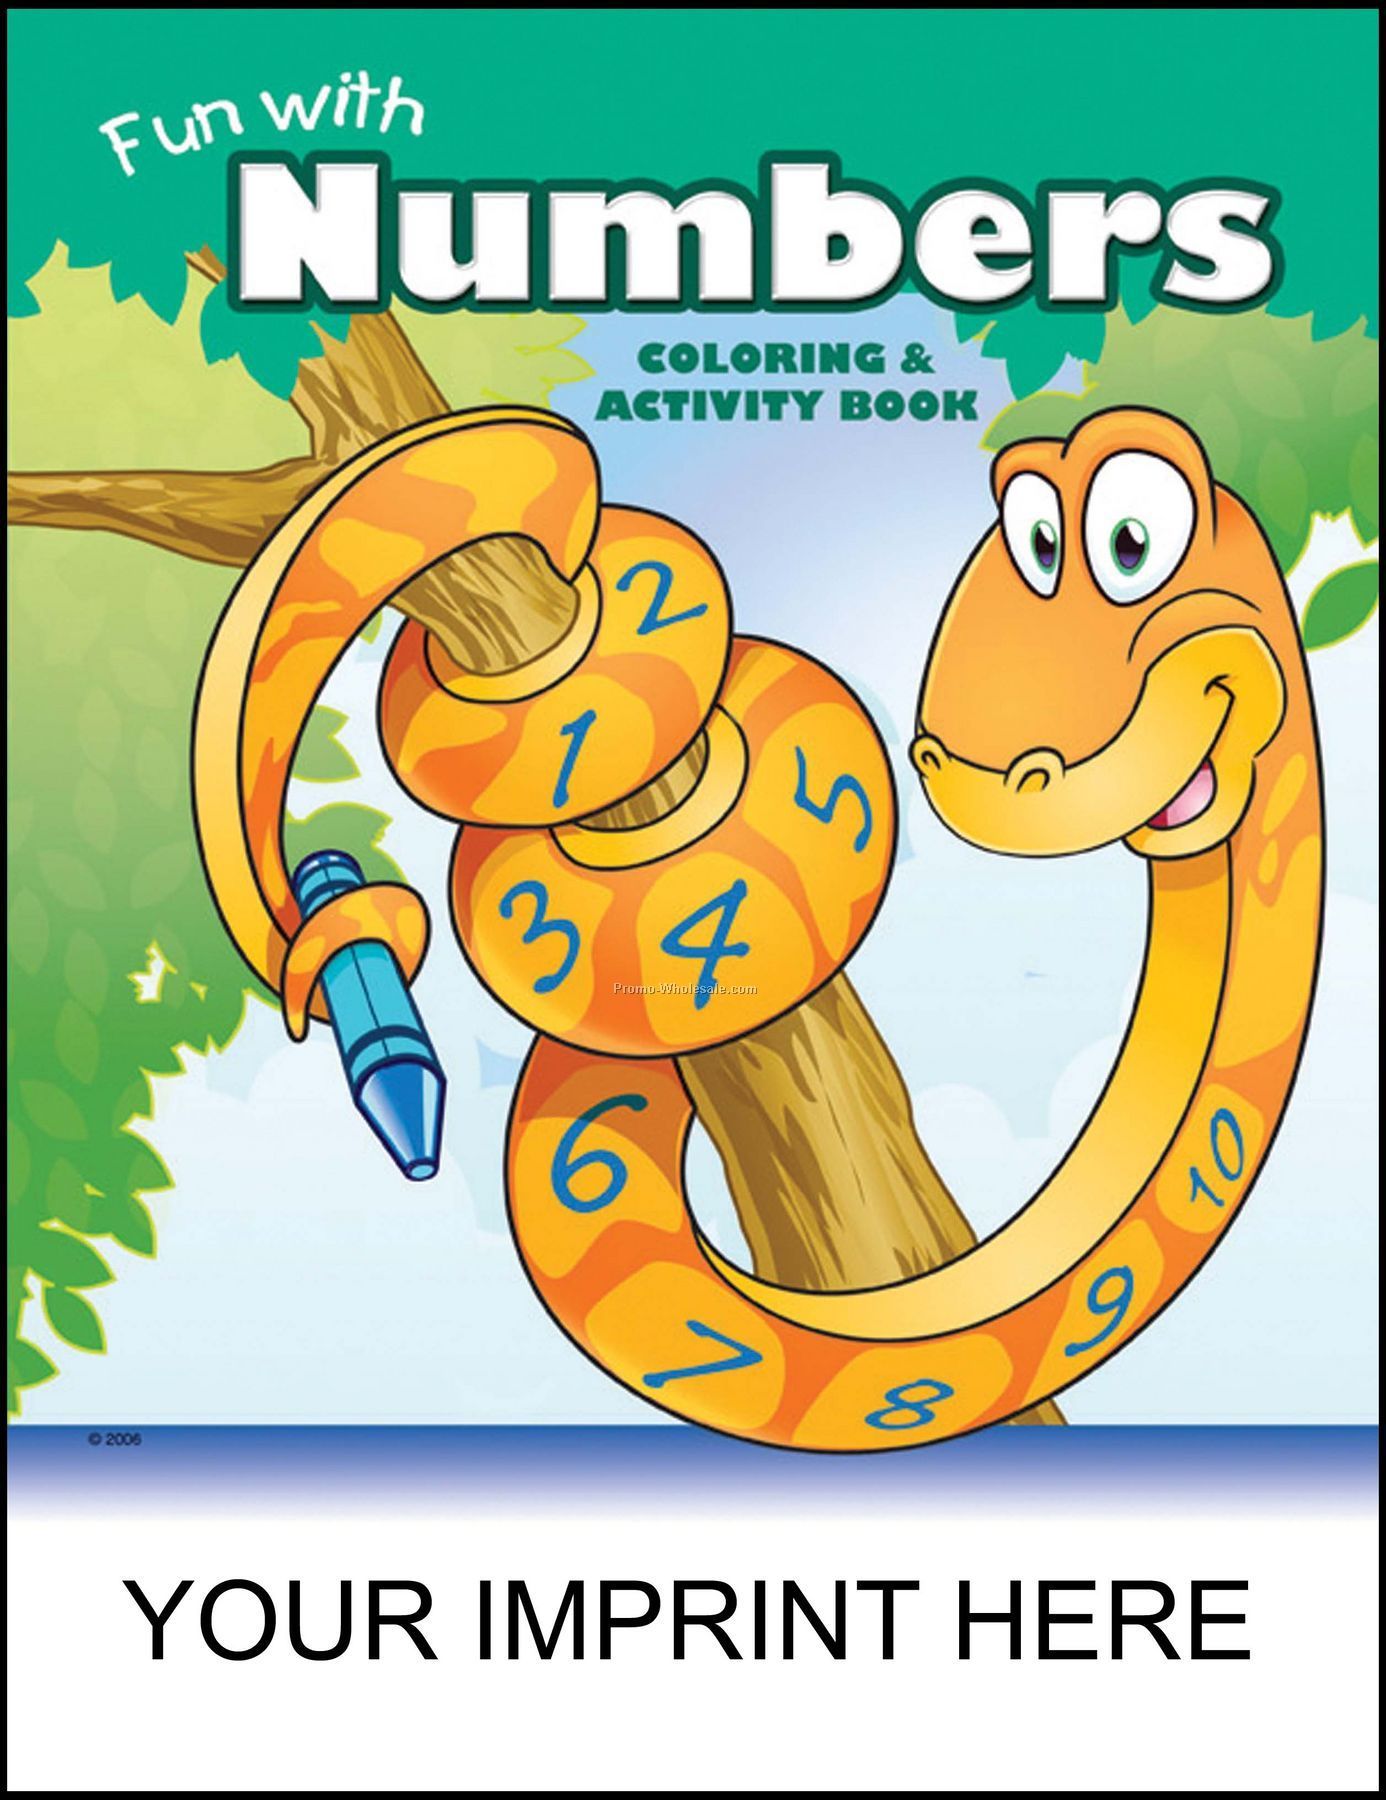 8-3/8"x10-7/8" Fun With Numbers Coloring & Activity Book